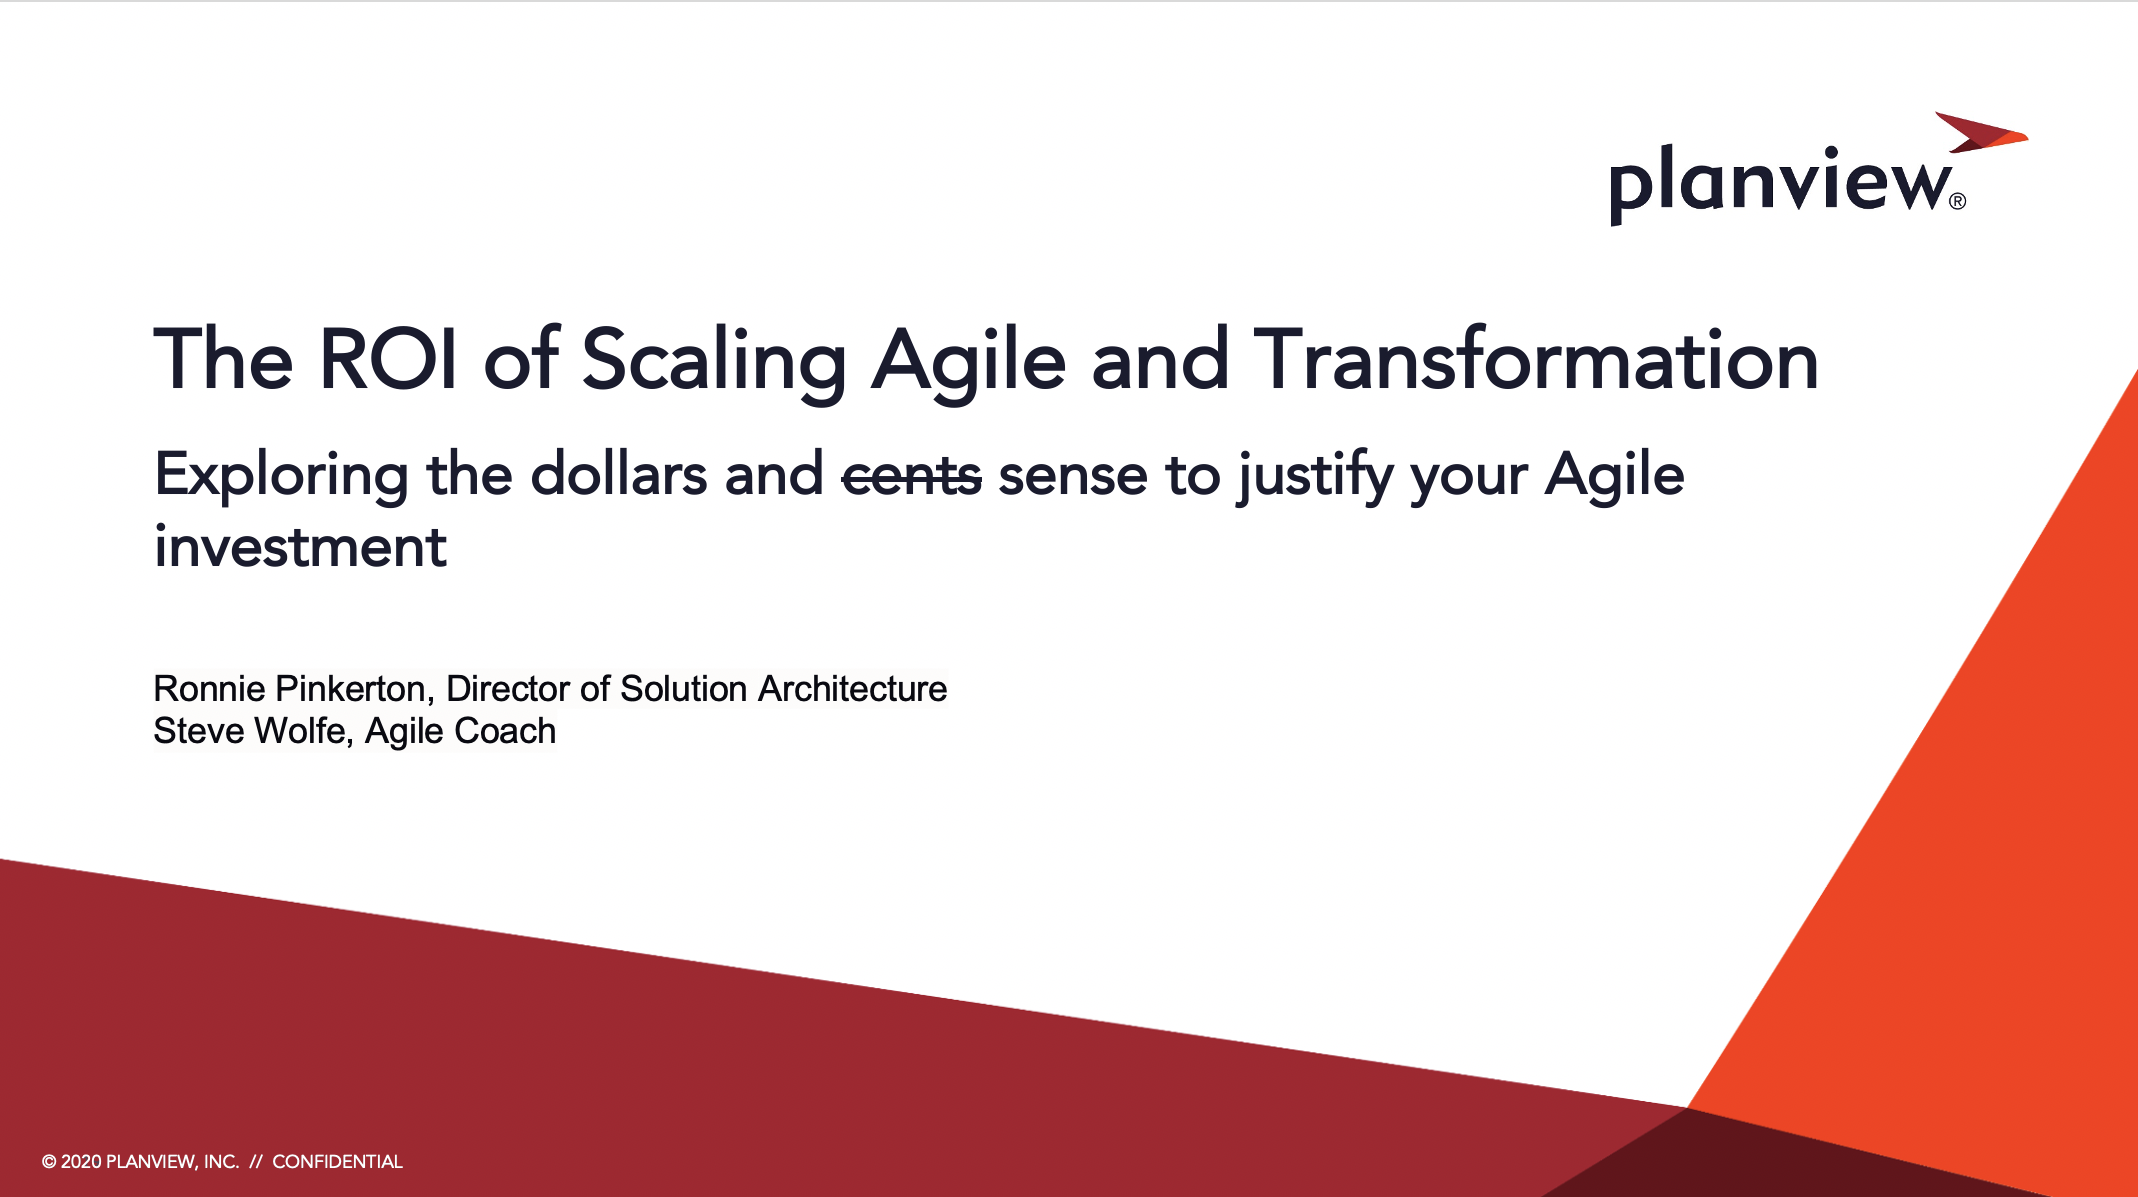 The ROI of Agile Scaling and Transformation